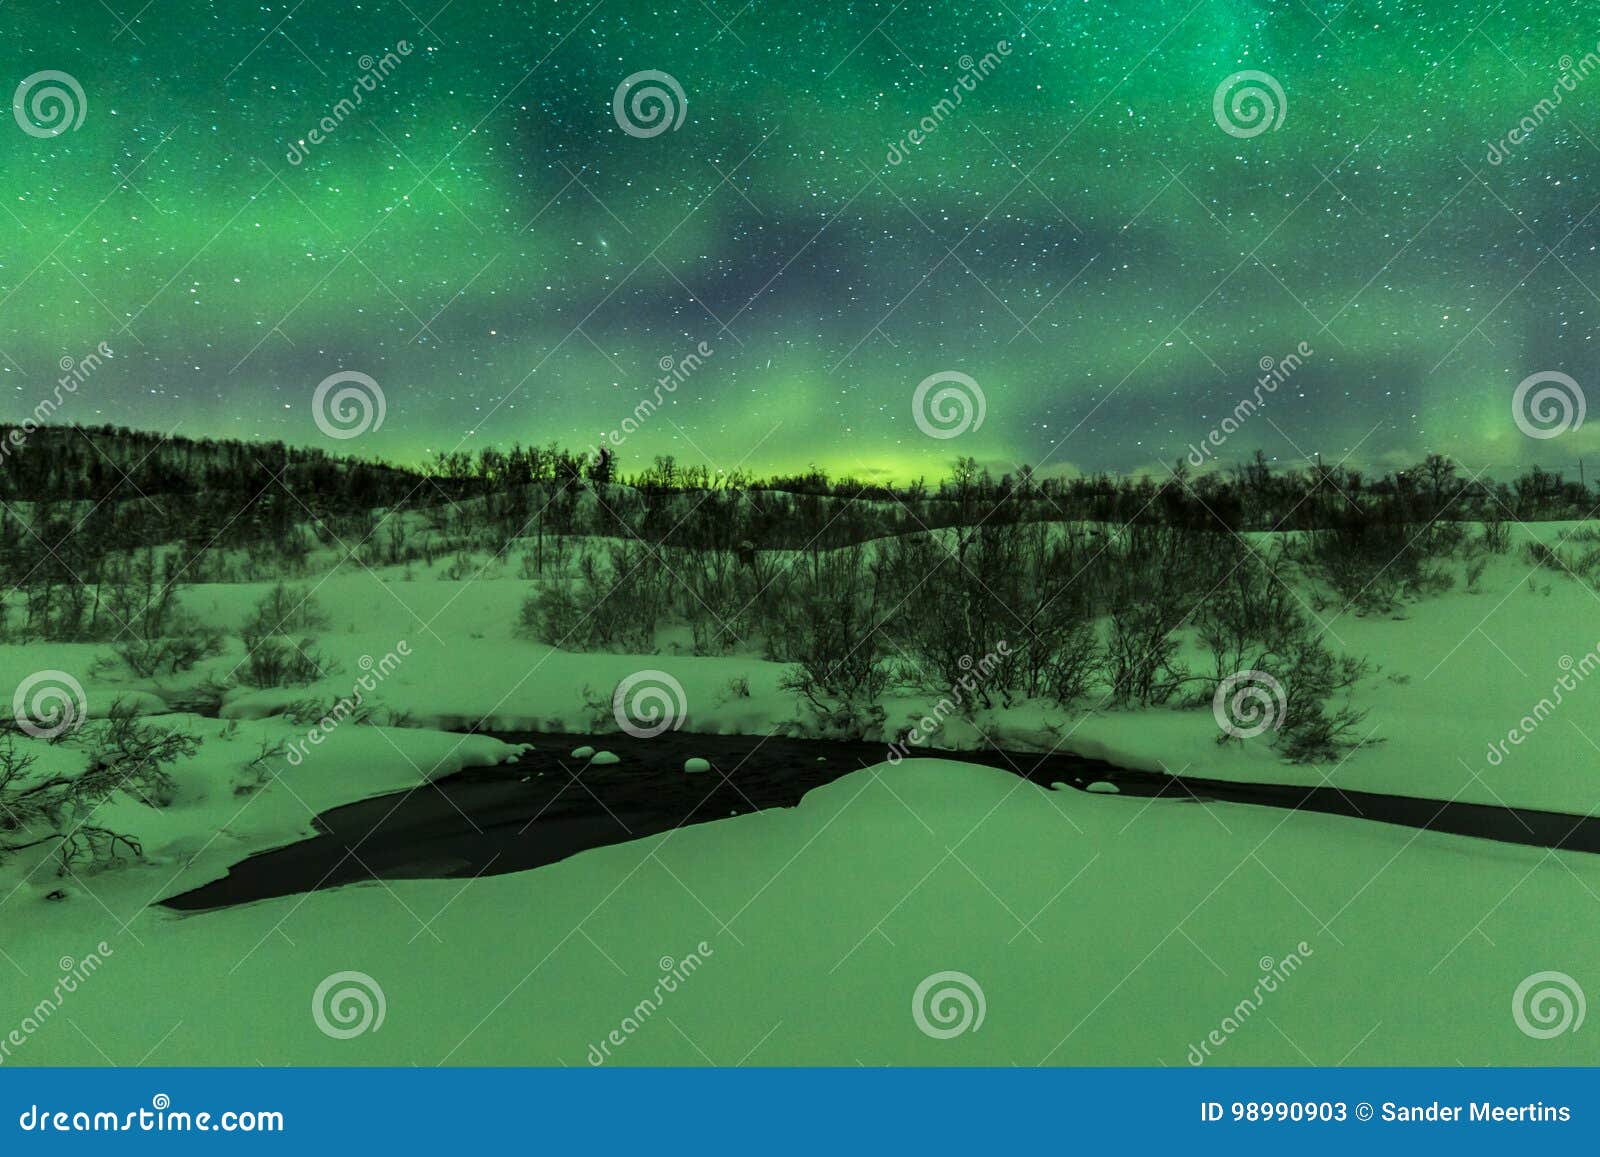 Northern Lights Above a Water Stream in a Winter Landscape. Stock Image ...